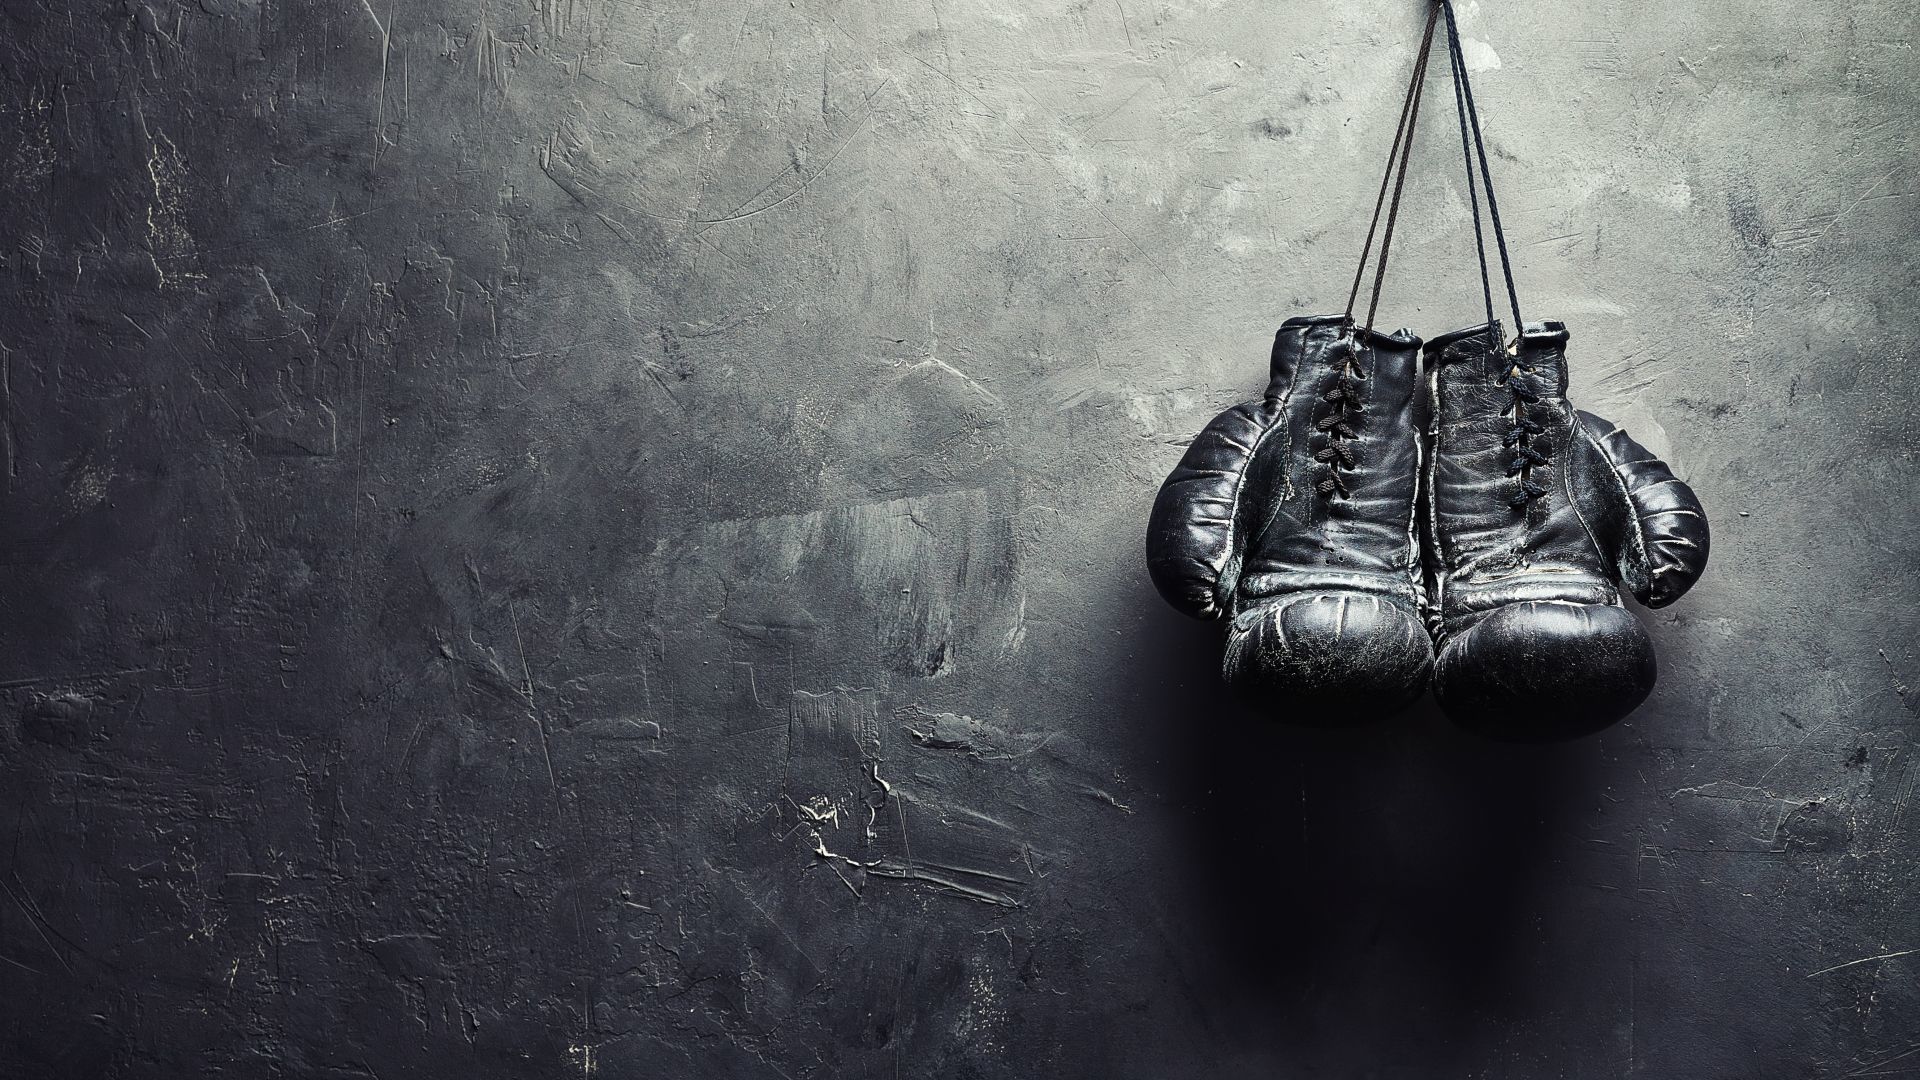 Sports Boxing HD Wallpaper | Background Image